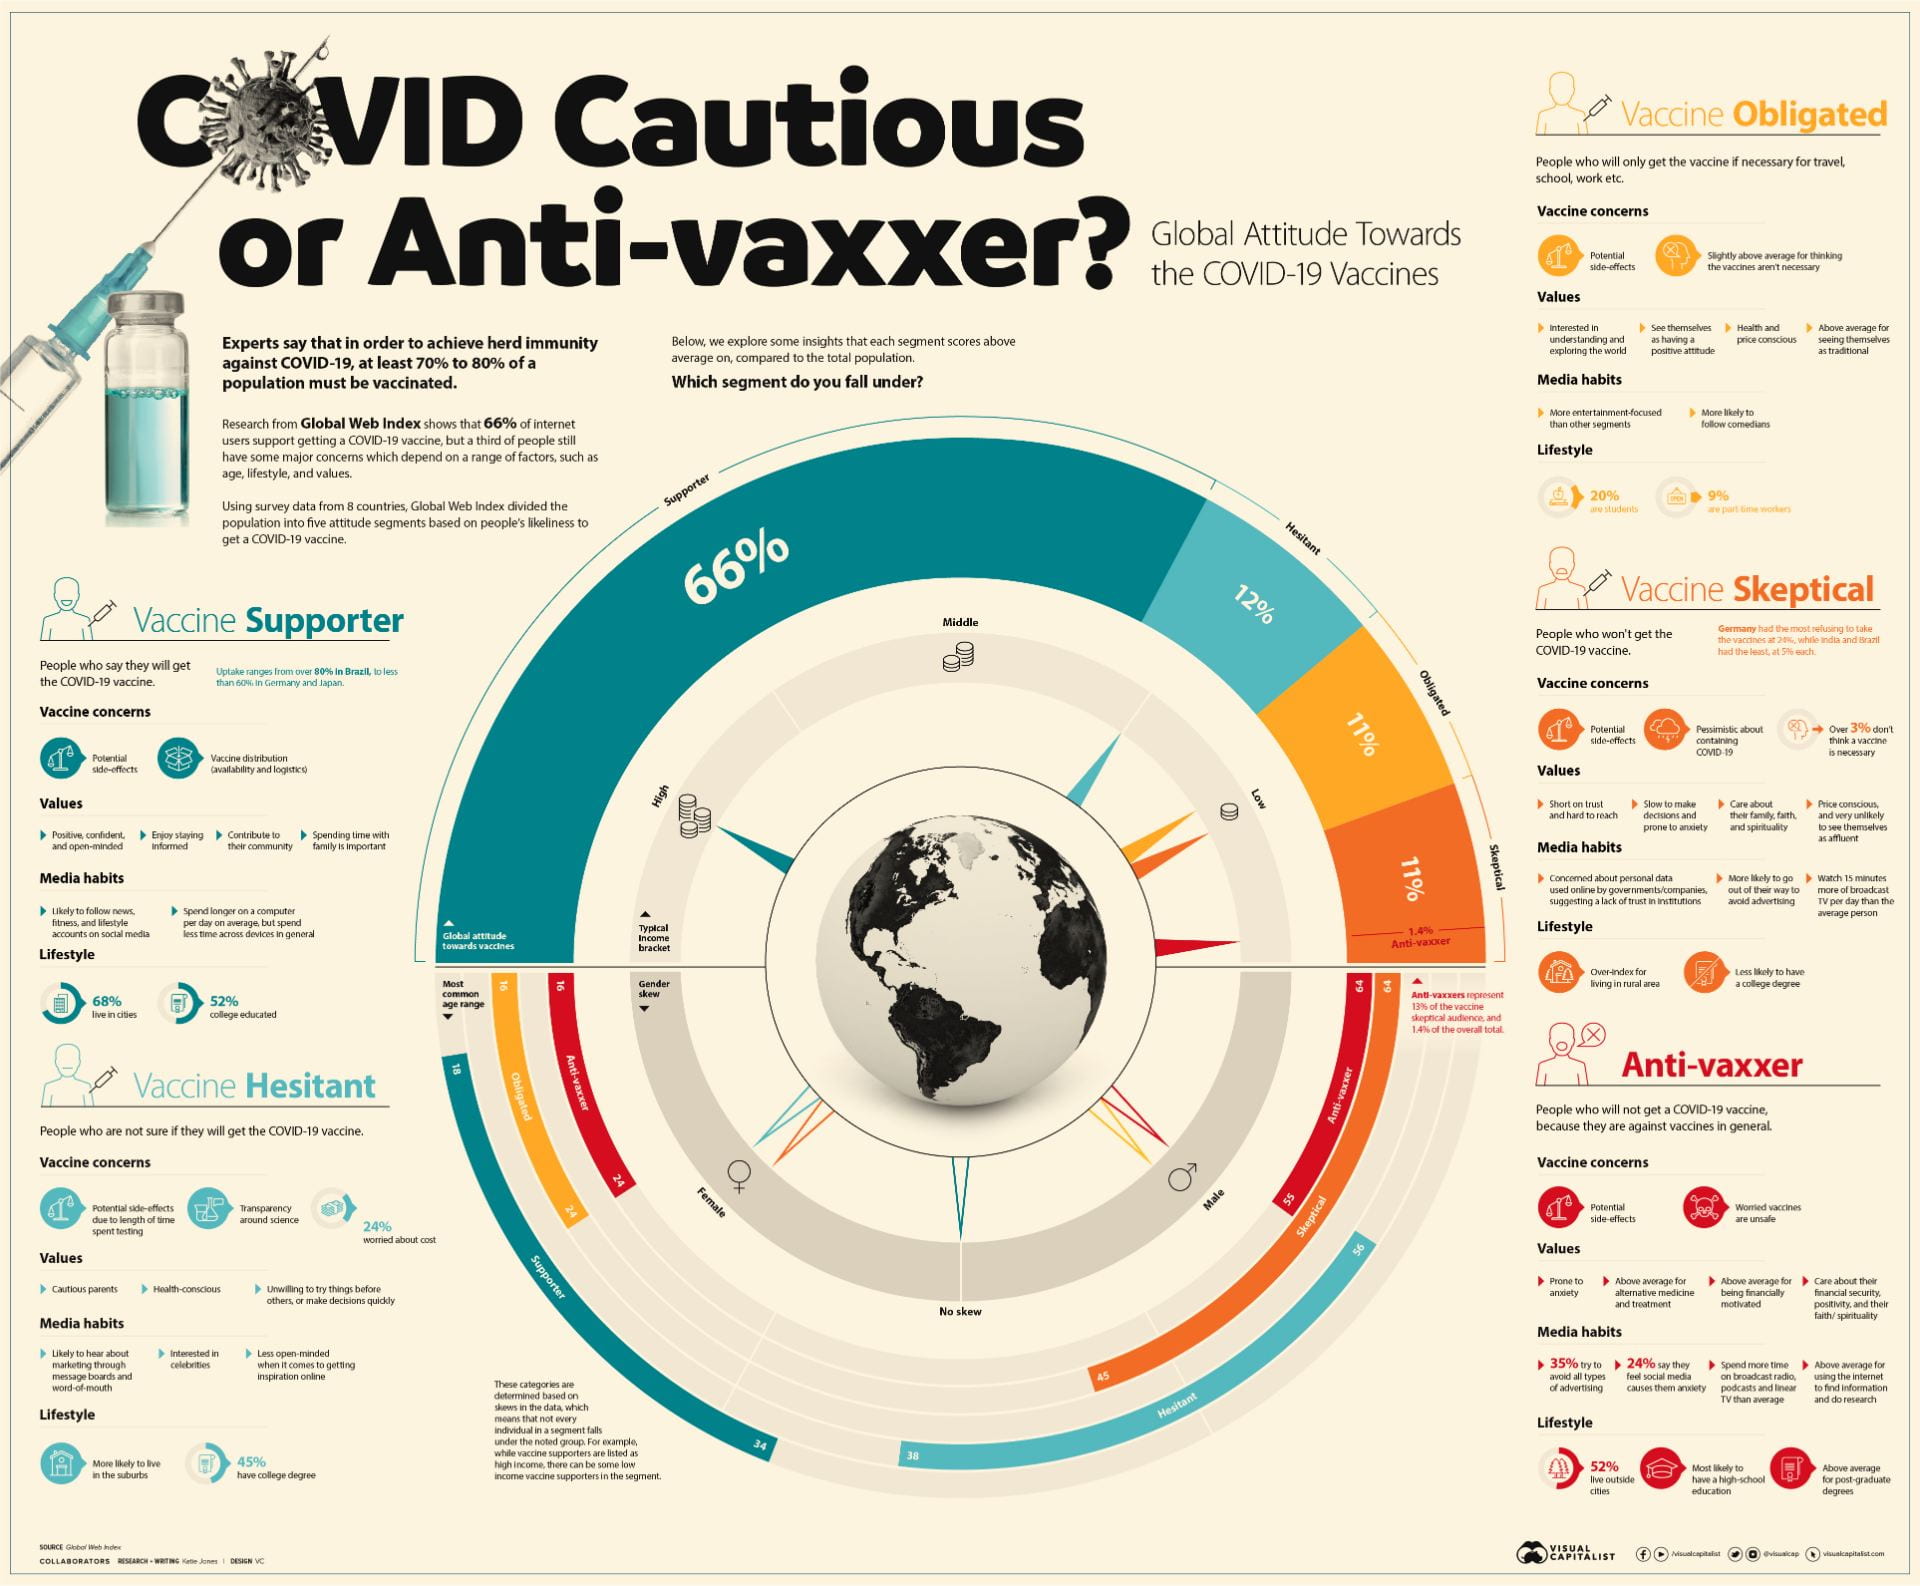 An infographic showing that 66% of people worldwide support COVID-19 vaccines, 12% are vaccine hesitant, 11% would only get the vaccine if they were obligated to, 11% are vaccine skeptical and 1.4% are anti-vaxxer.